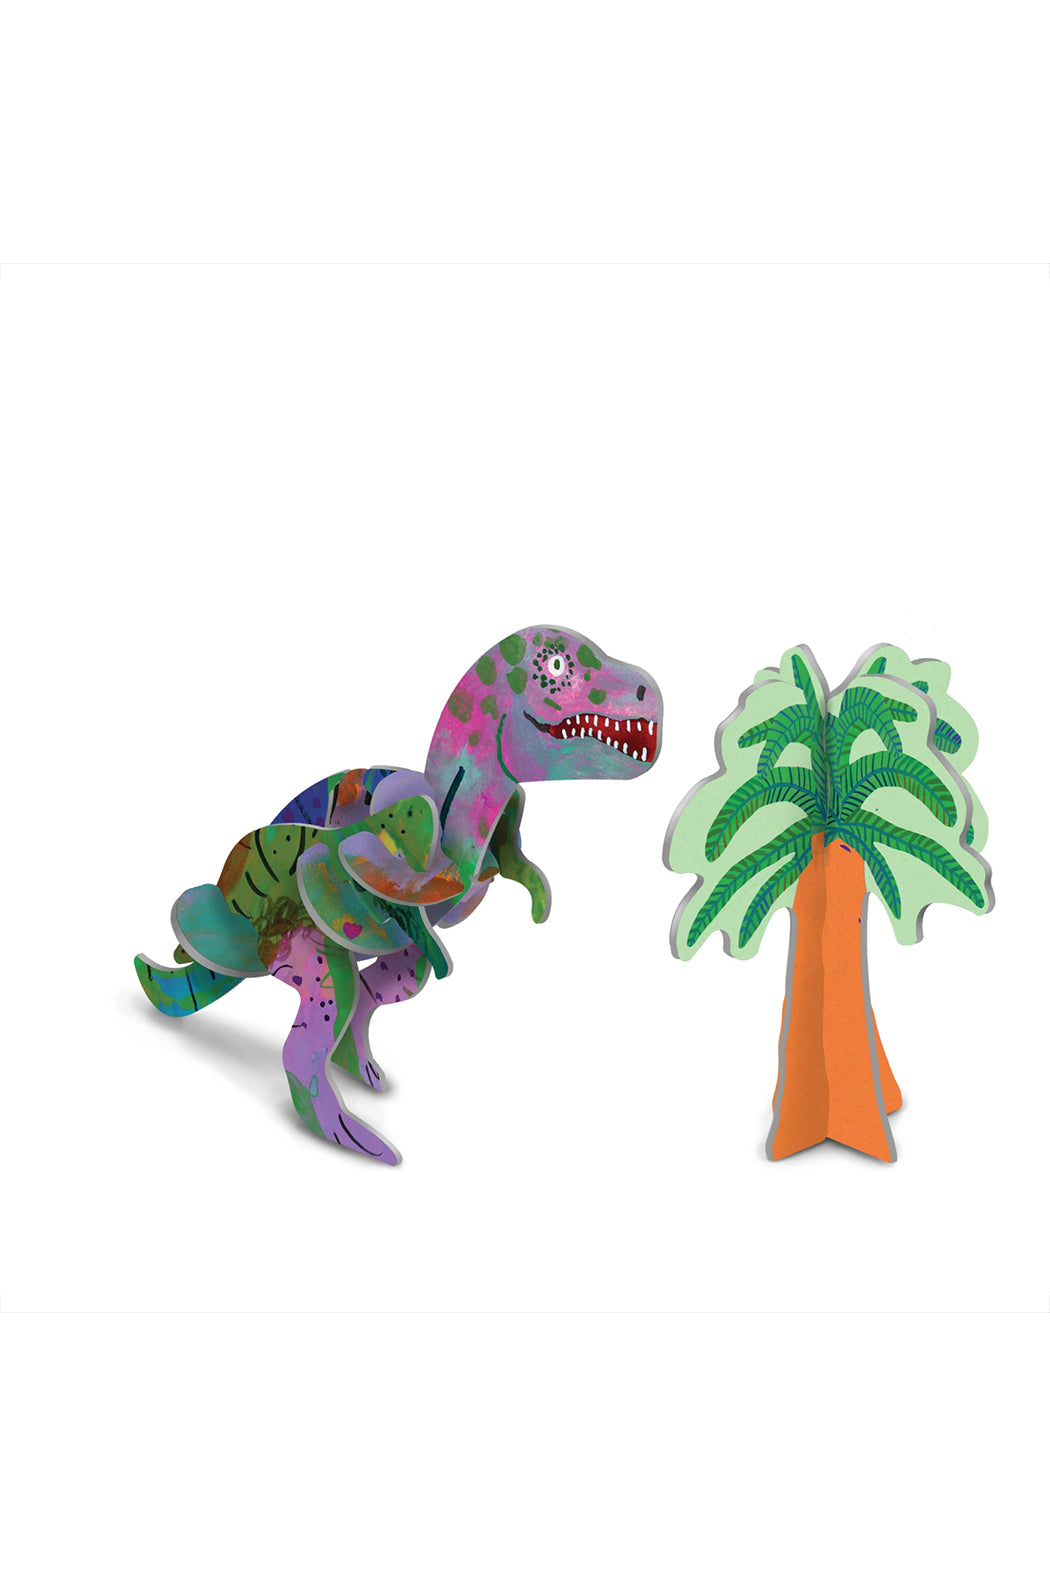 3D Dinosaurs with Prehistoric Plants Assortment by eeBoo